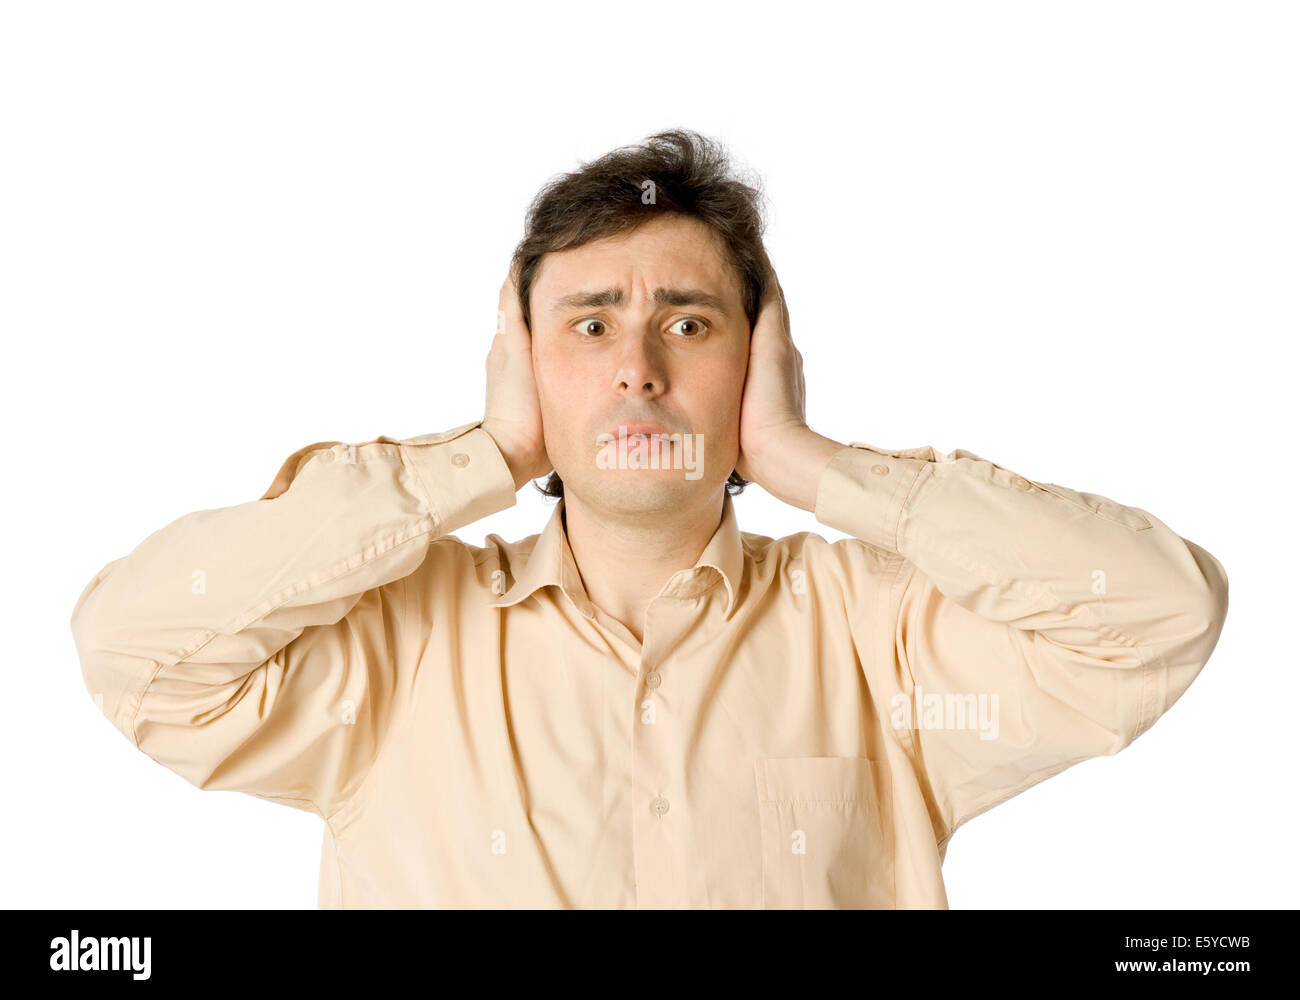 A man with frightened face, over white Stock Photo - Alamy